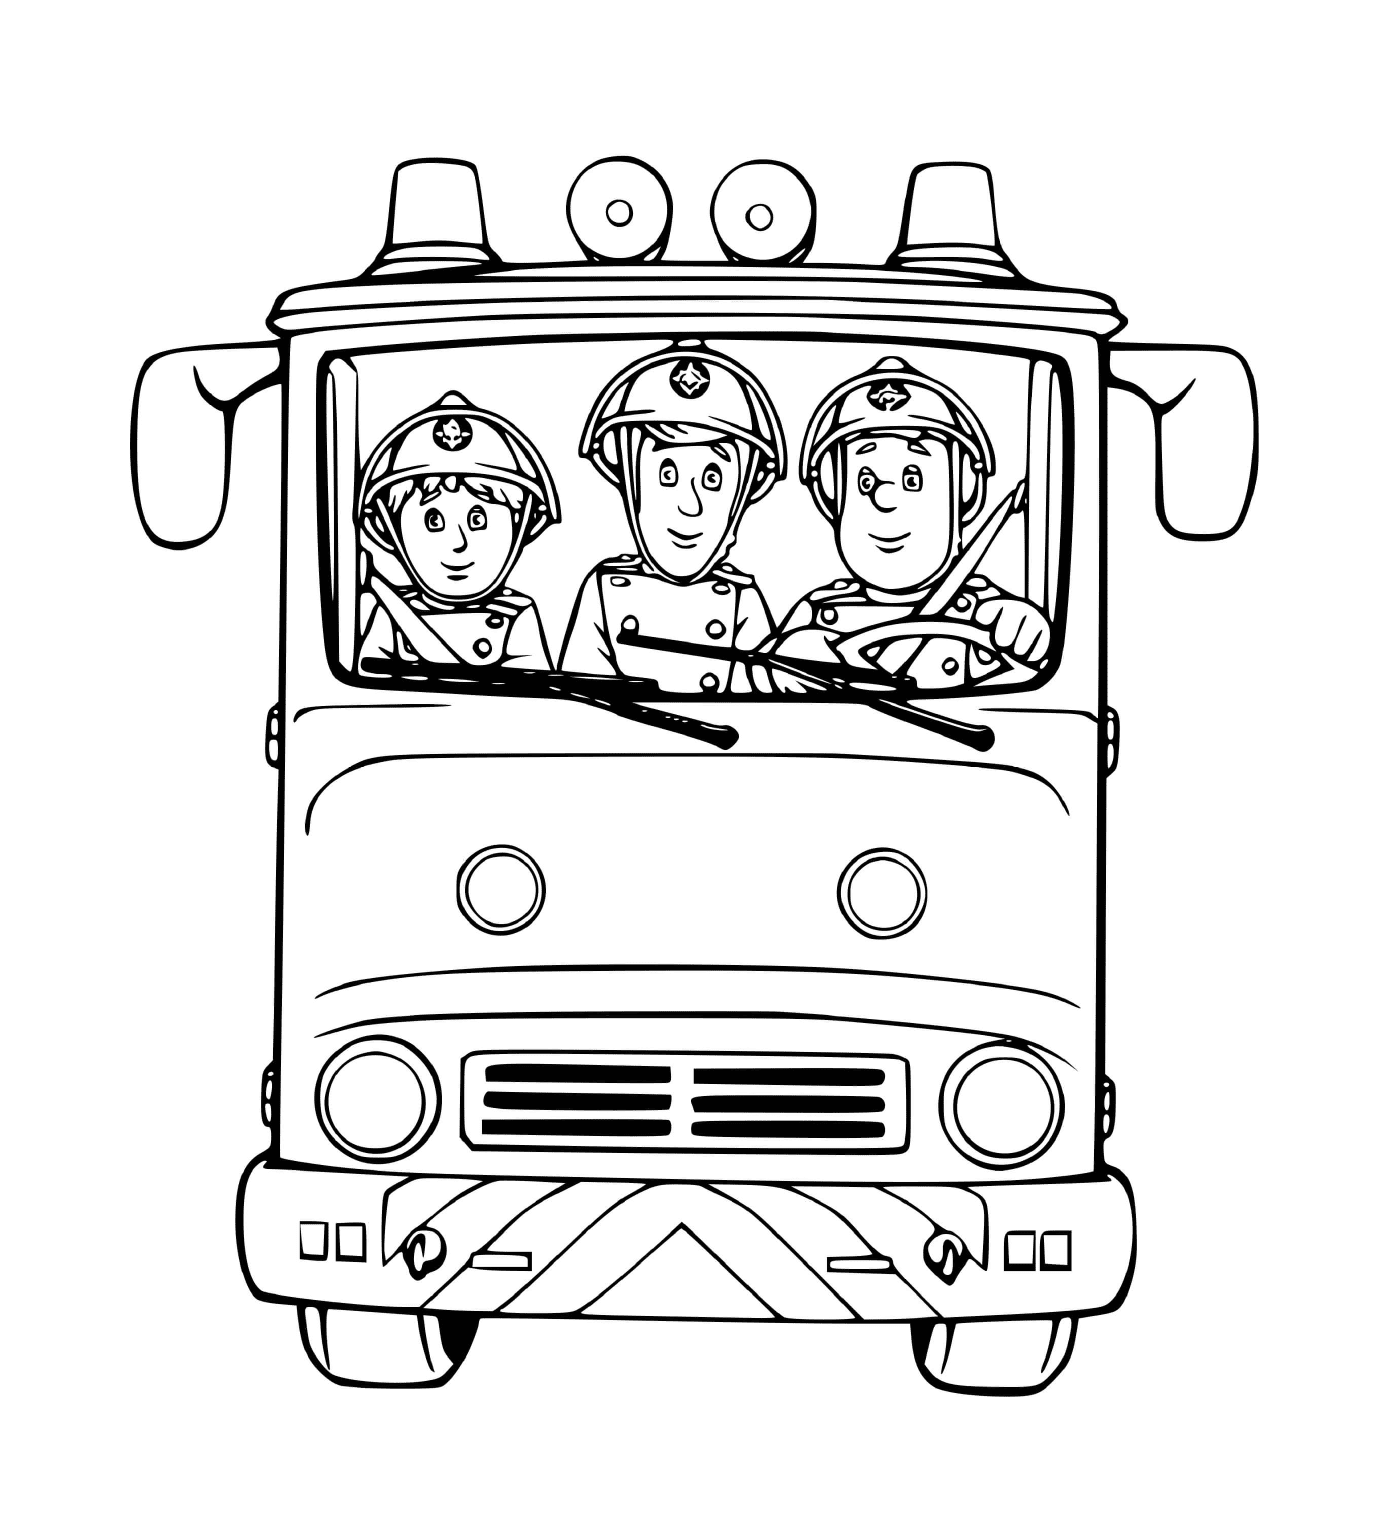  Three firefighters in a truck ready to act 